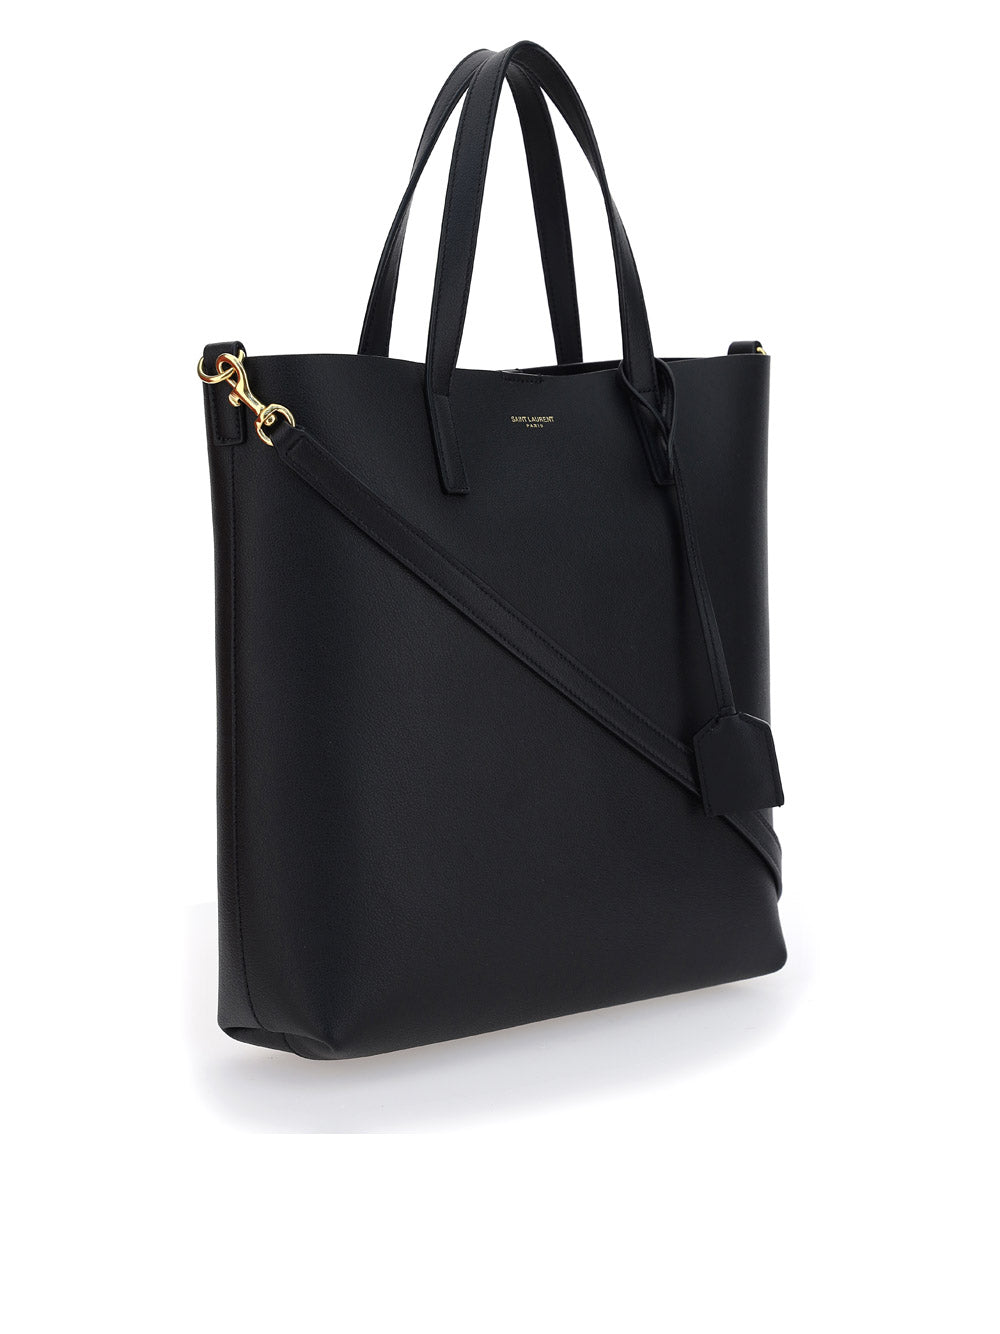 Shopping Bag Saint Laurent Toy In Supple Leather - Black